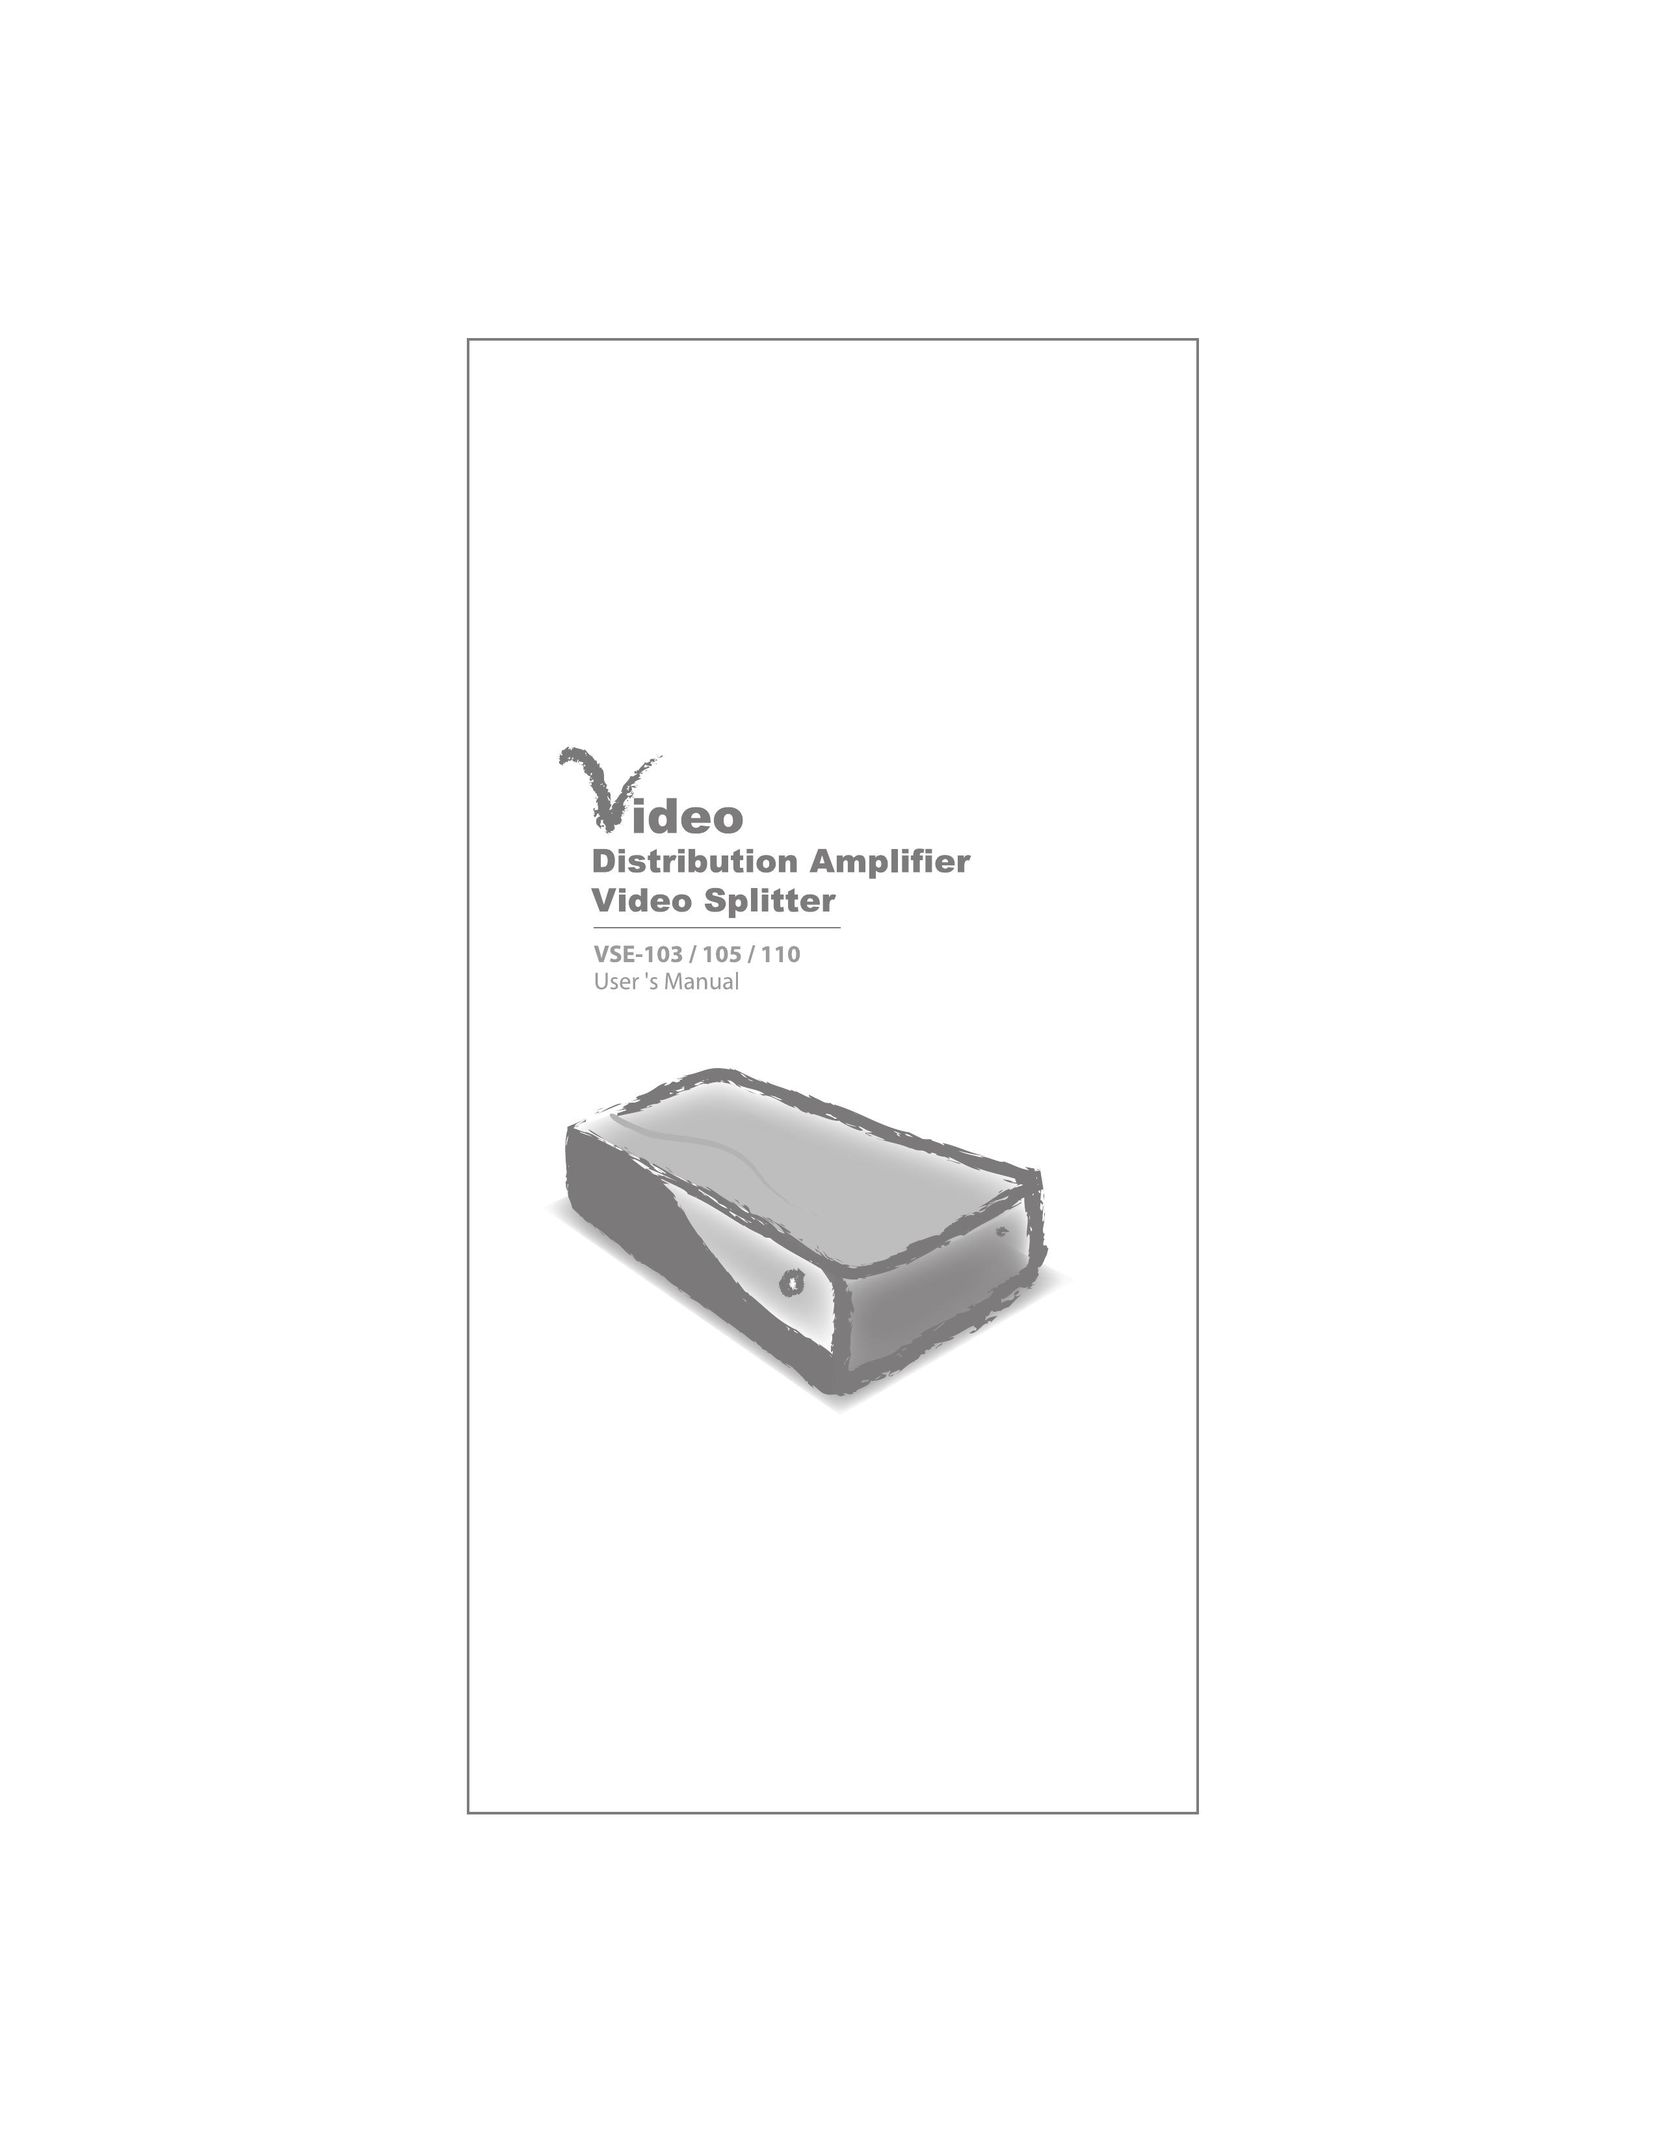 ConnectPRO VSE103 Switch User Manual